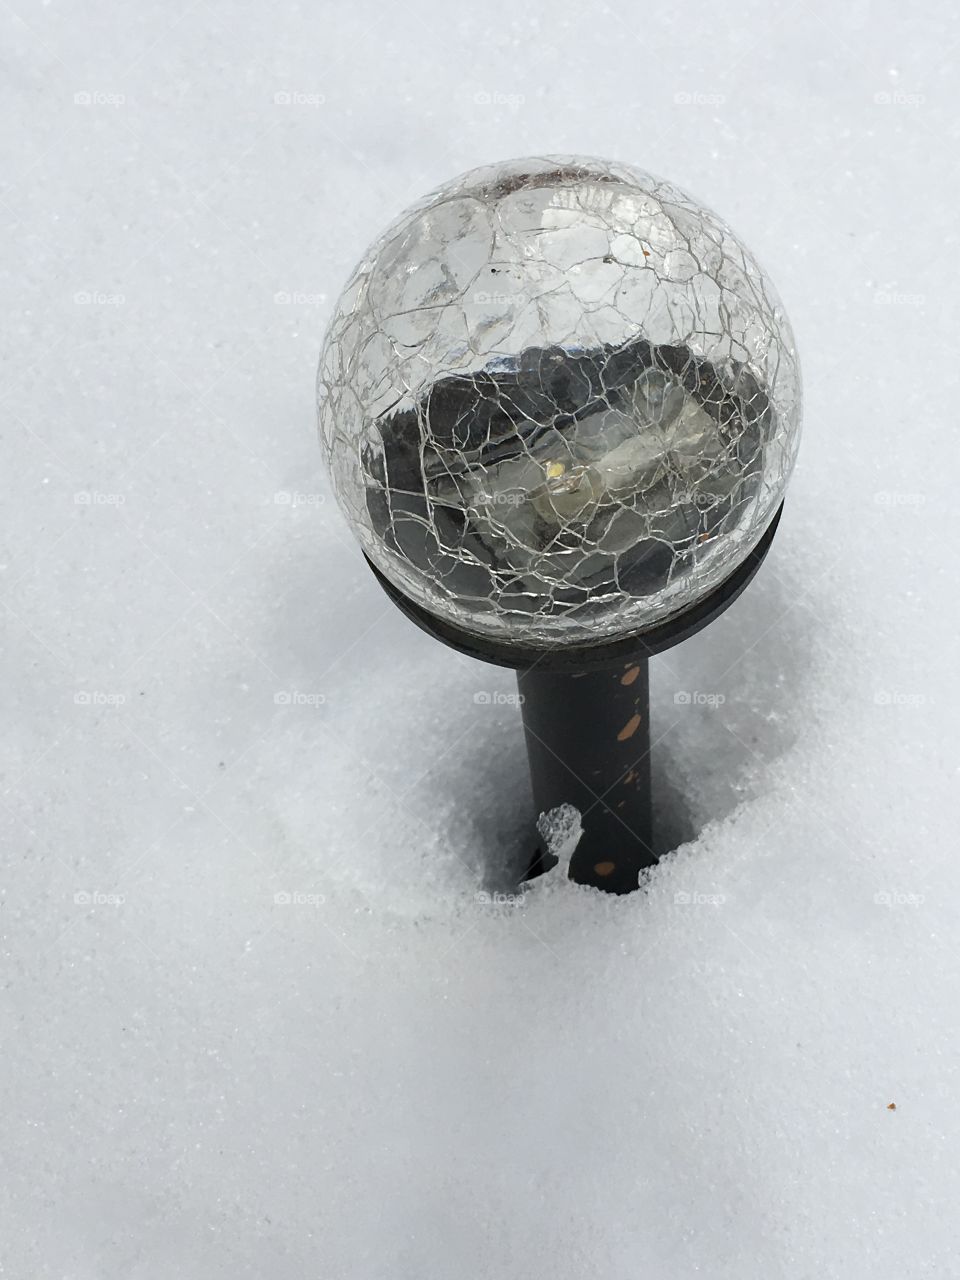  New vision for a snow globe but solar, located in Michigan 